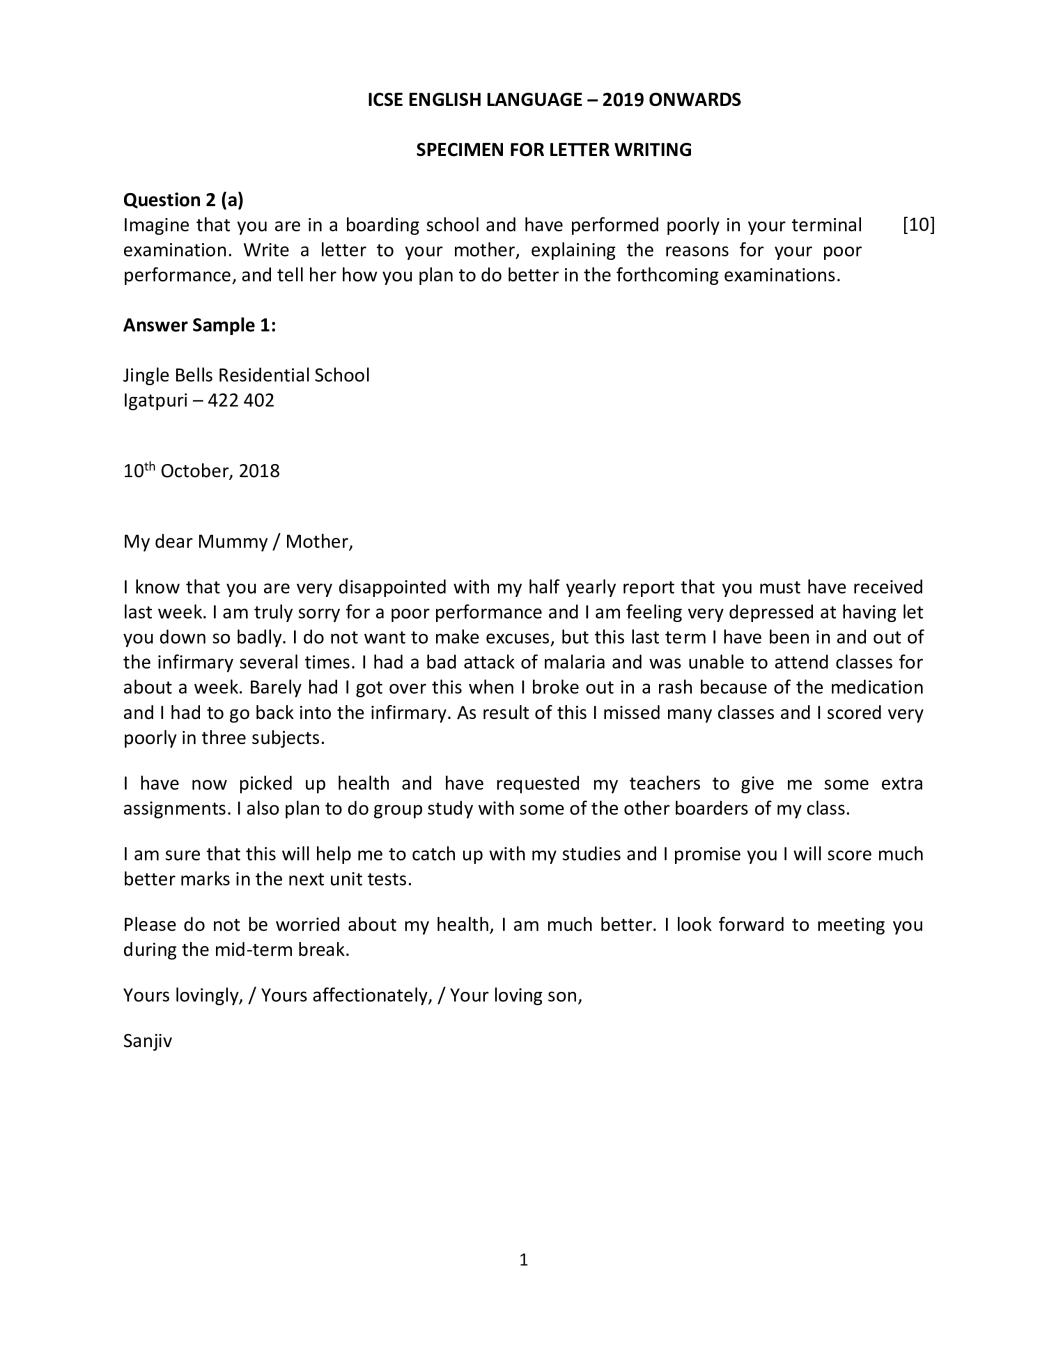 ICSE Class 10 Specimen Paper 2019 for Letter Writing  - Page 1